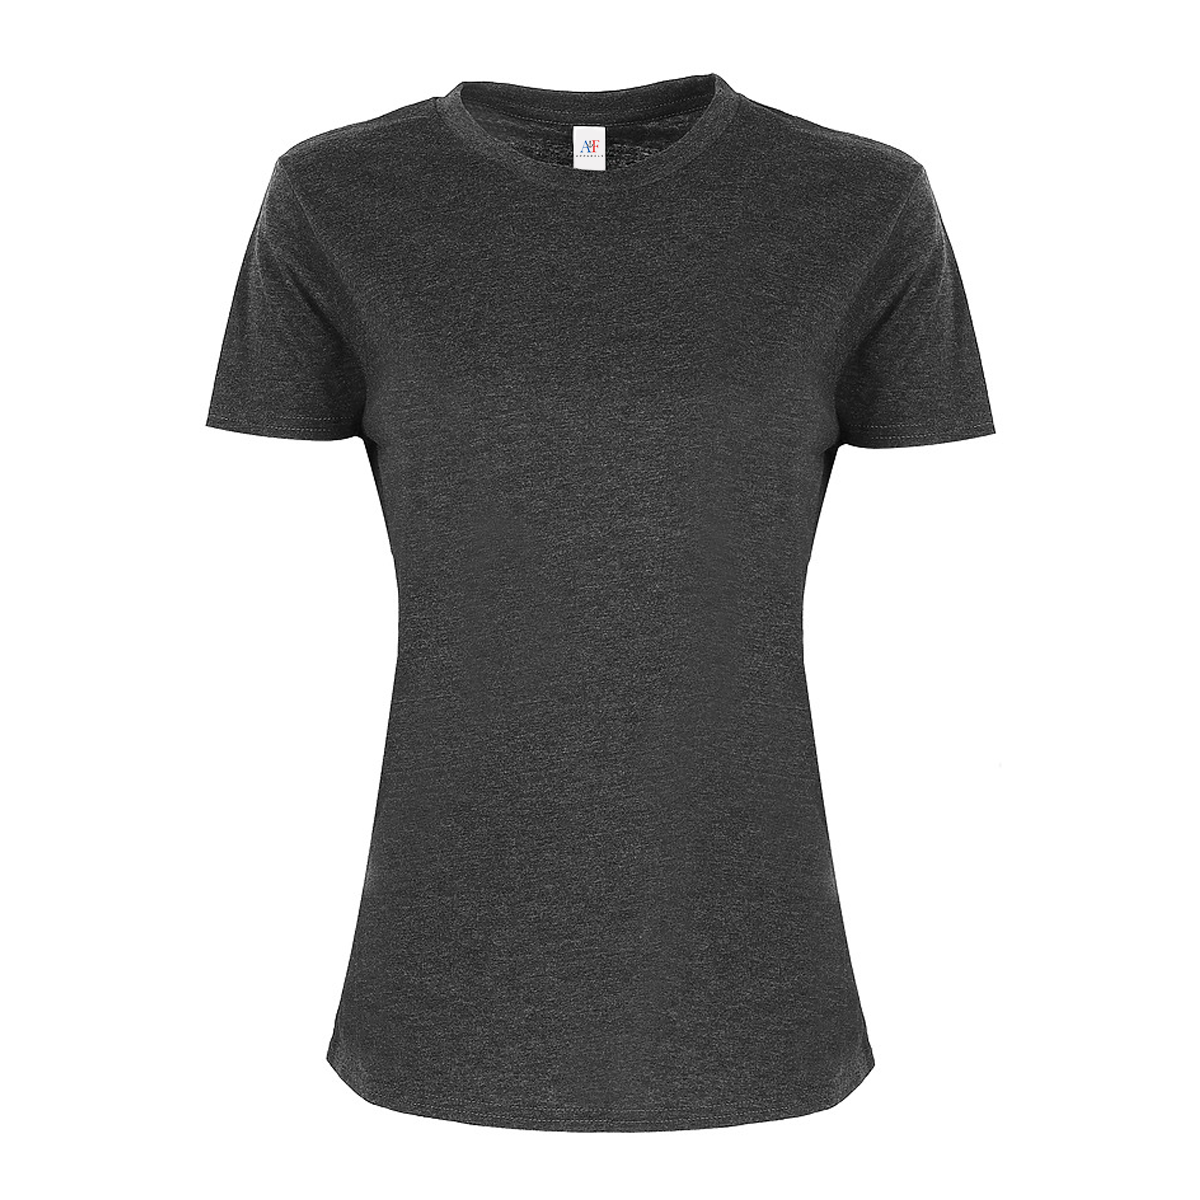 1005 Women's Fit Tee 4.3 Oz - Charcoal Heather Color - AF APPARELS(USA)